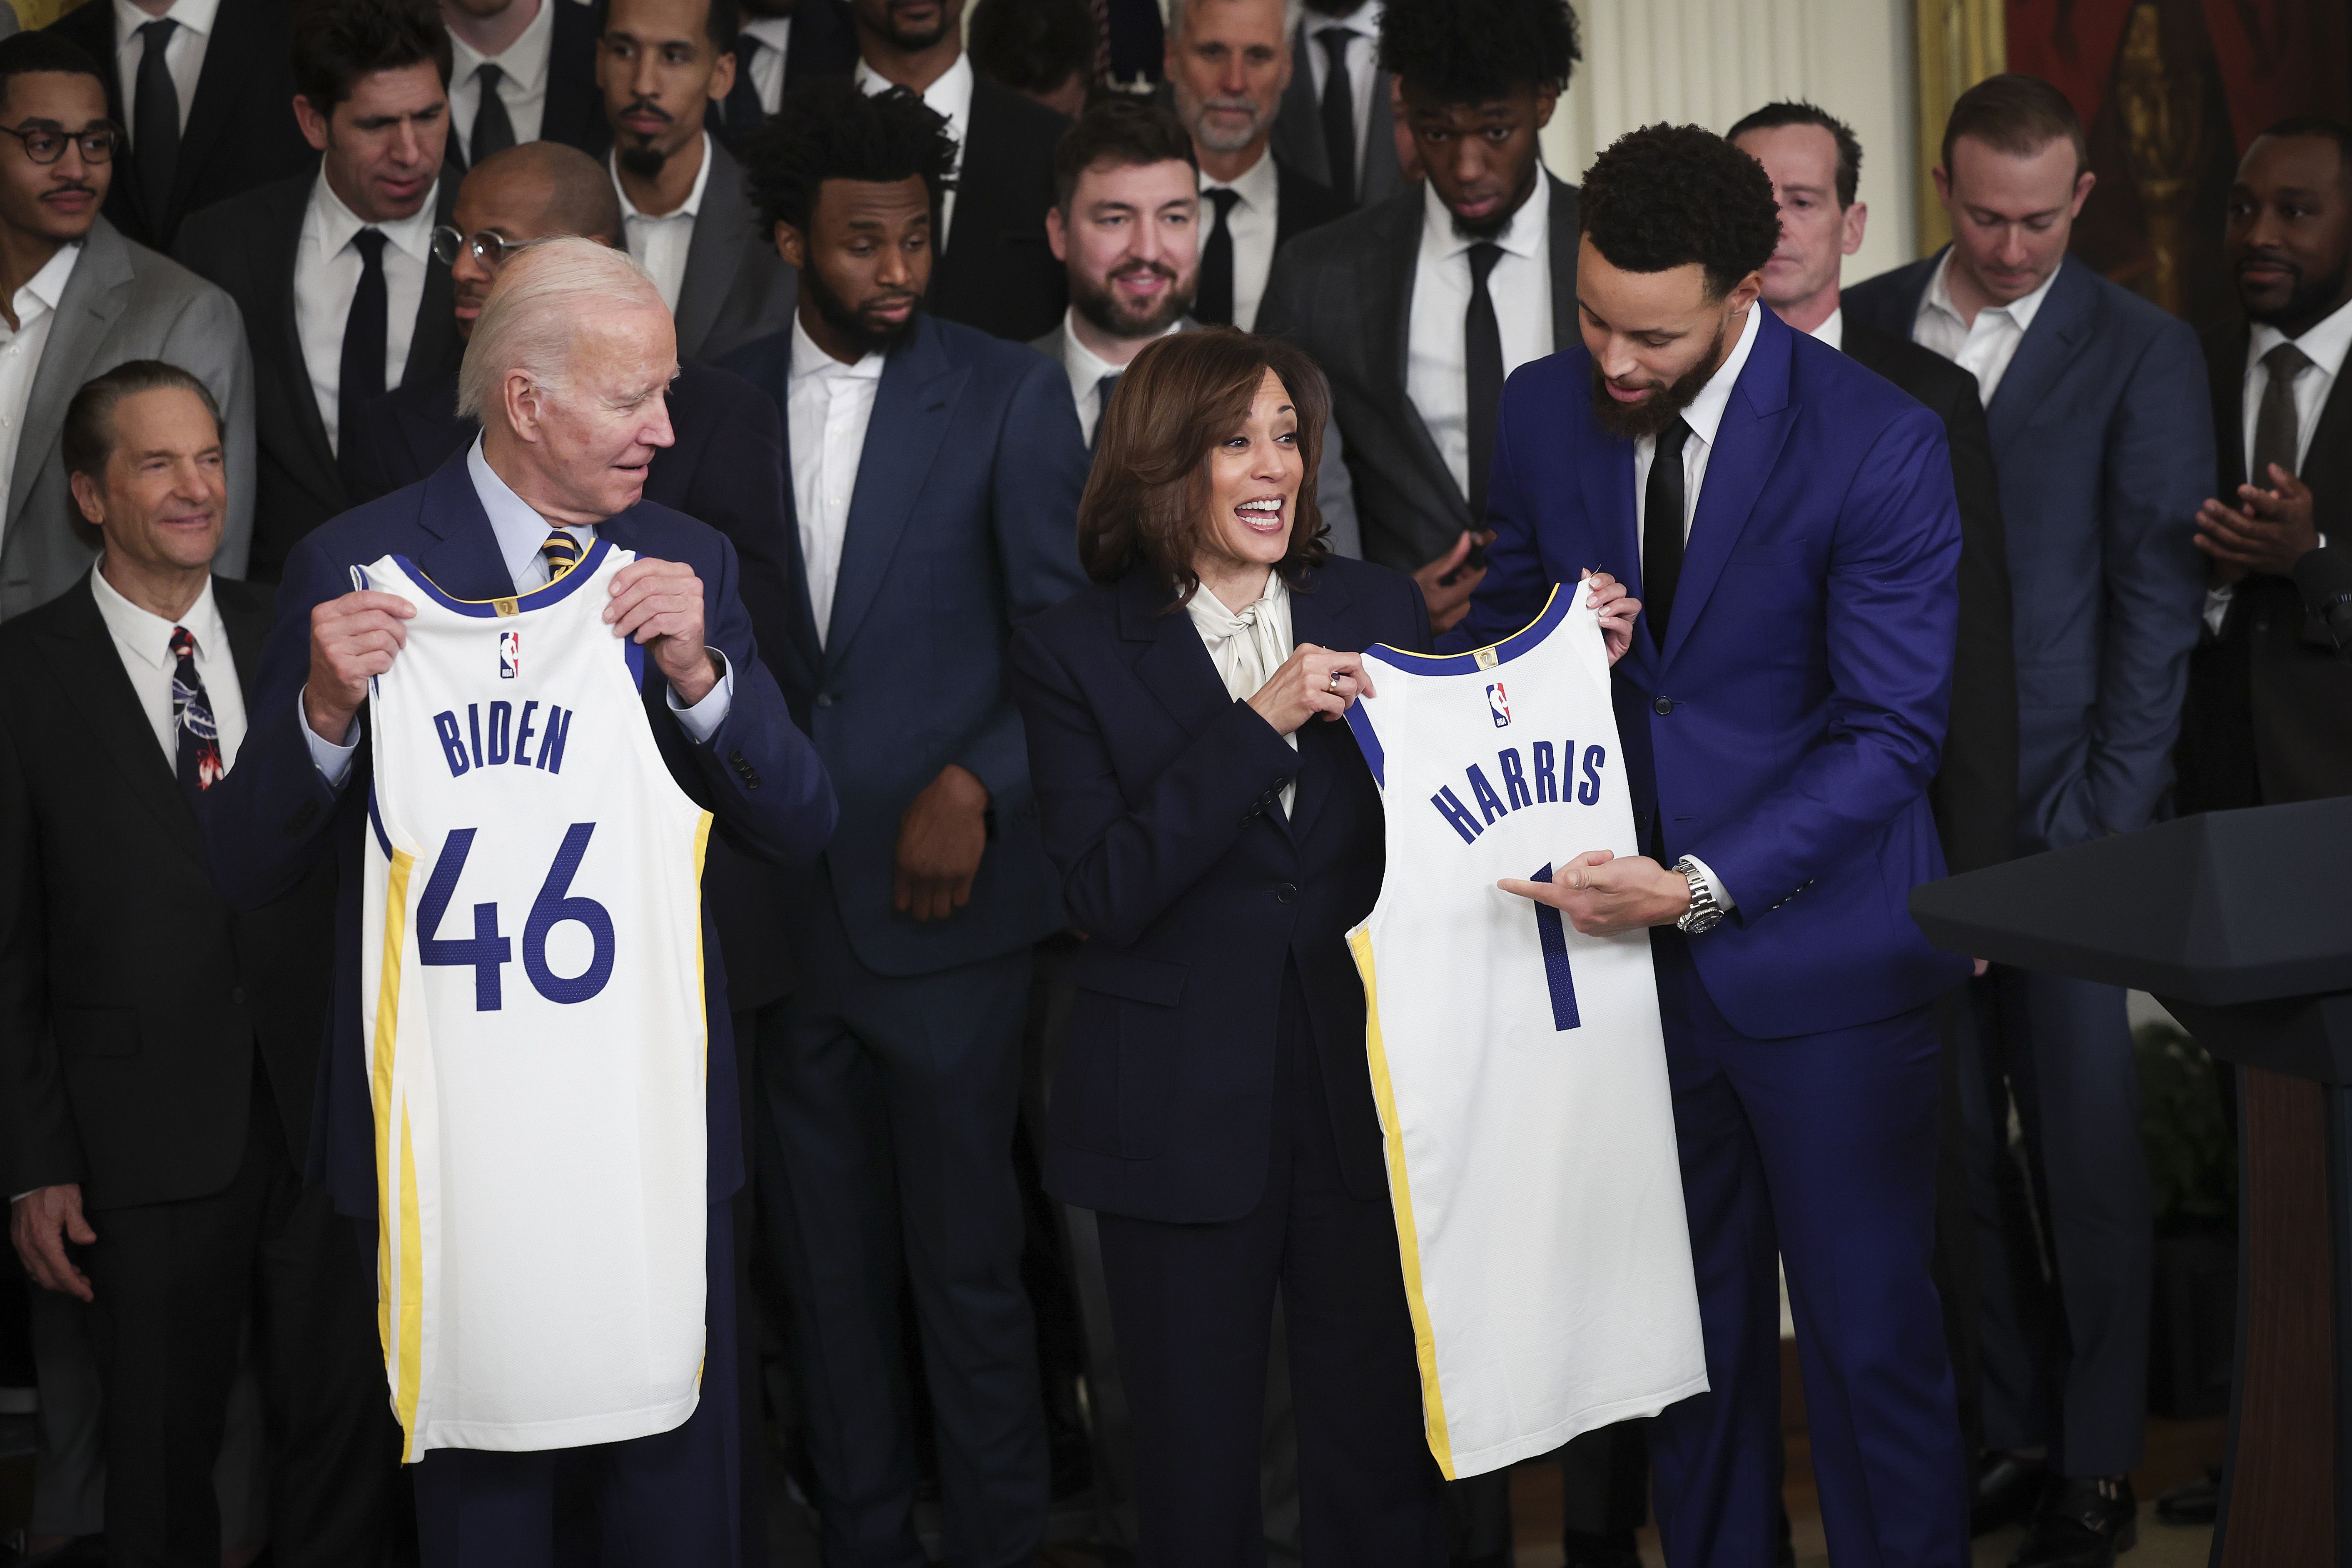 Biden and Kamala Harris with the Golden State Warriors